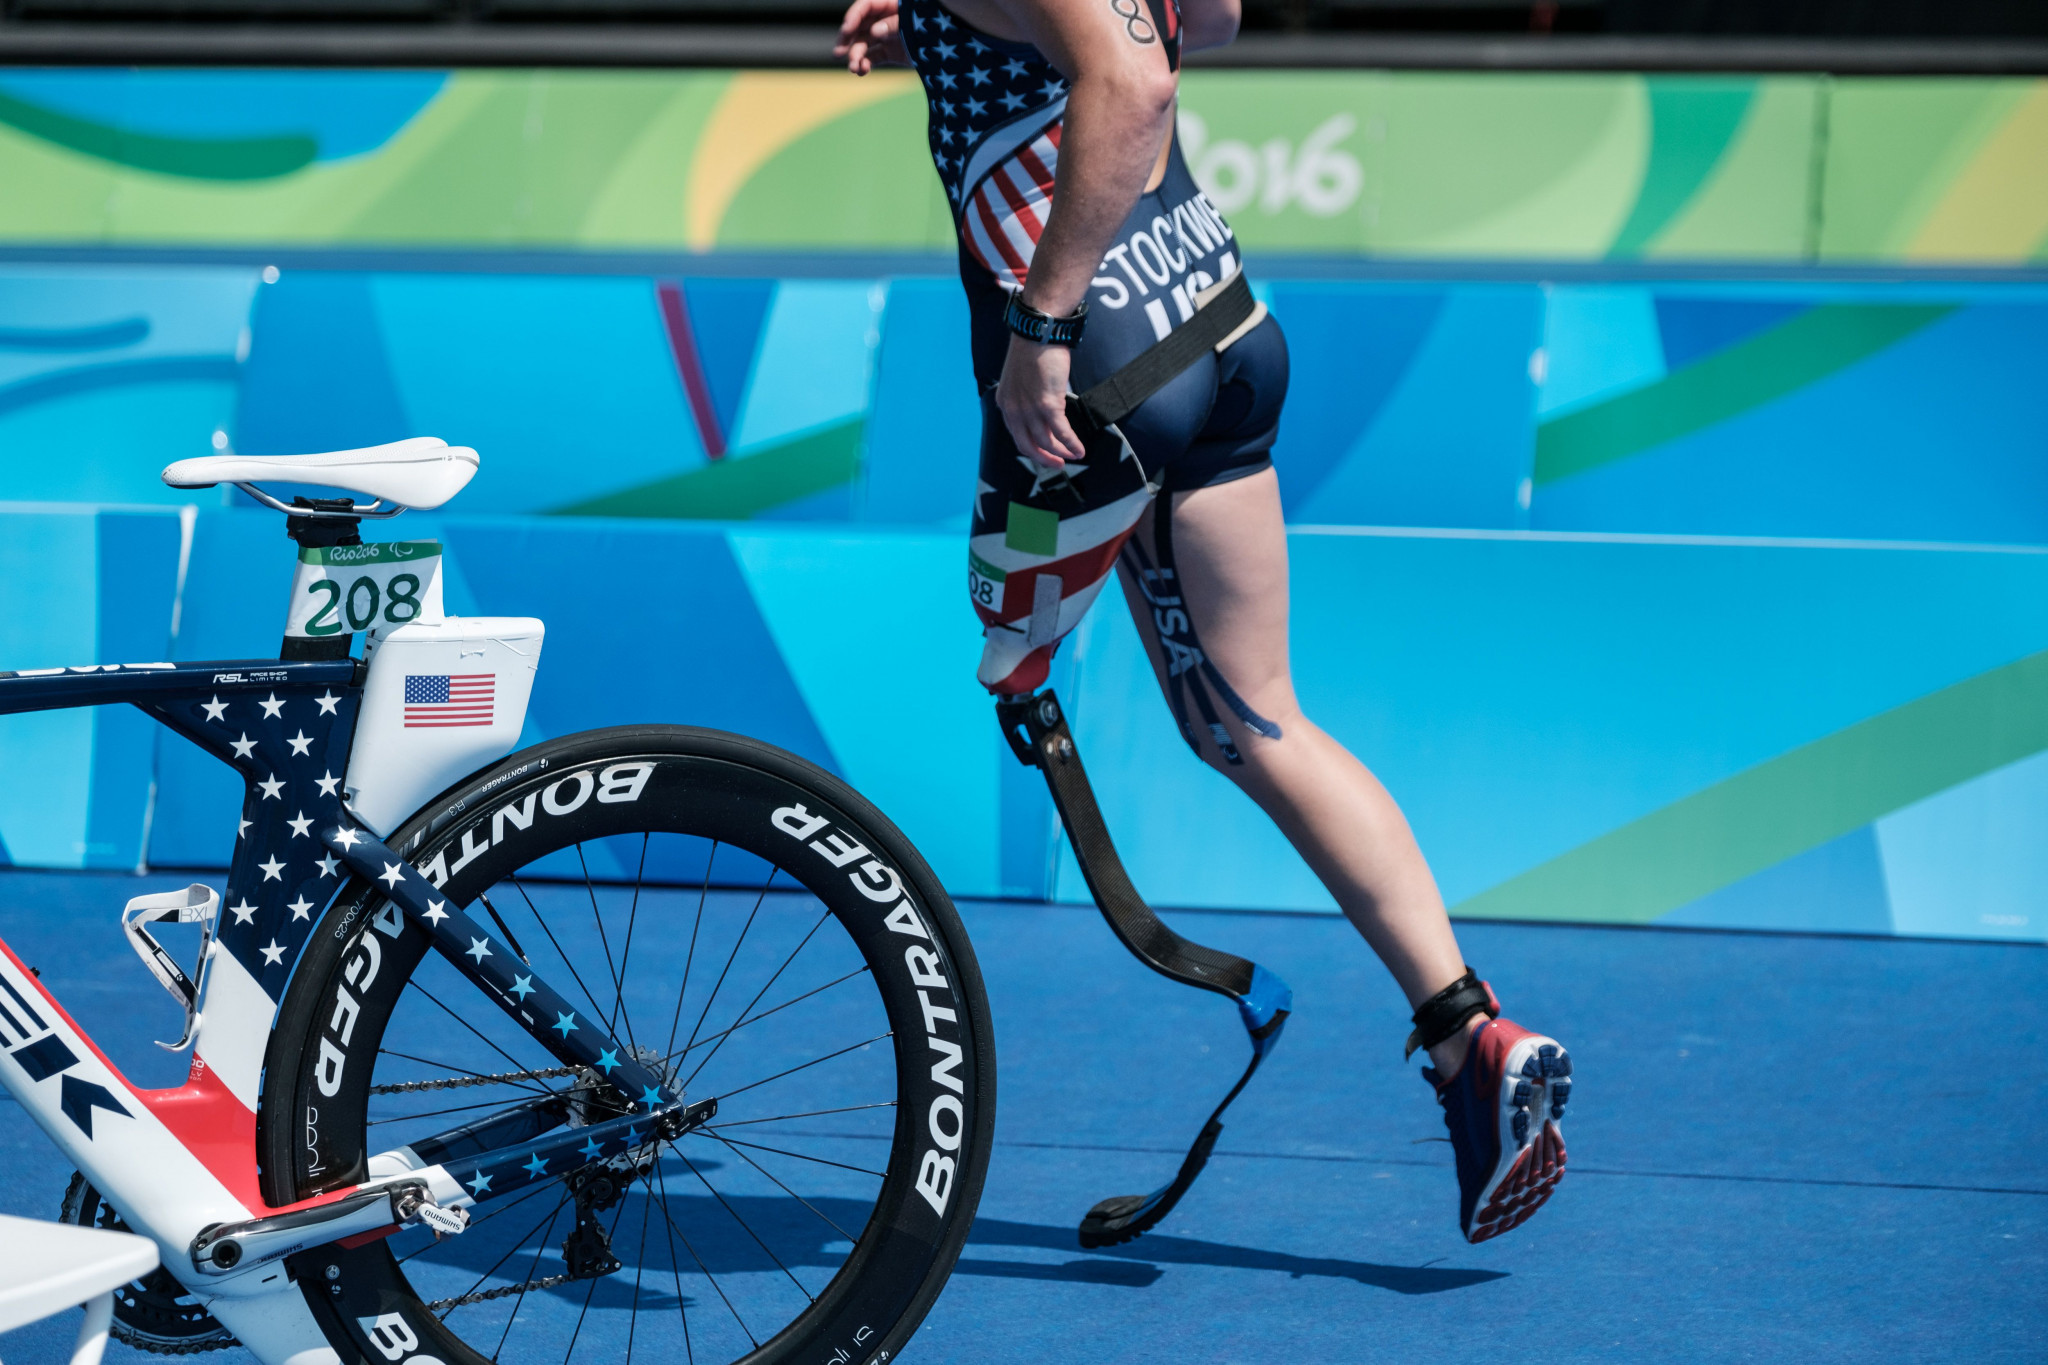 There are 80 qualification spots available for Para-triathlon at the Tokyo 2020 Paralympic Games ©Getty Images